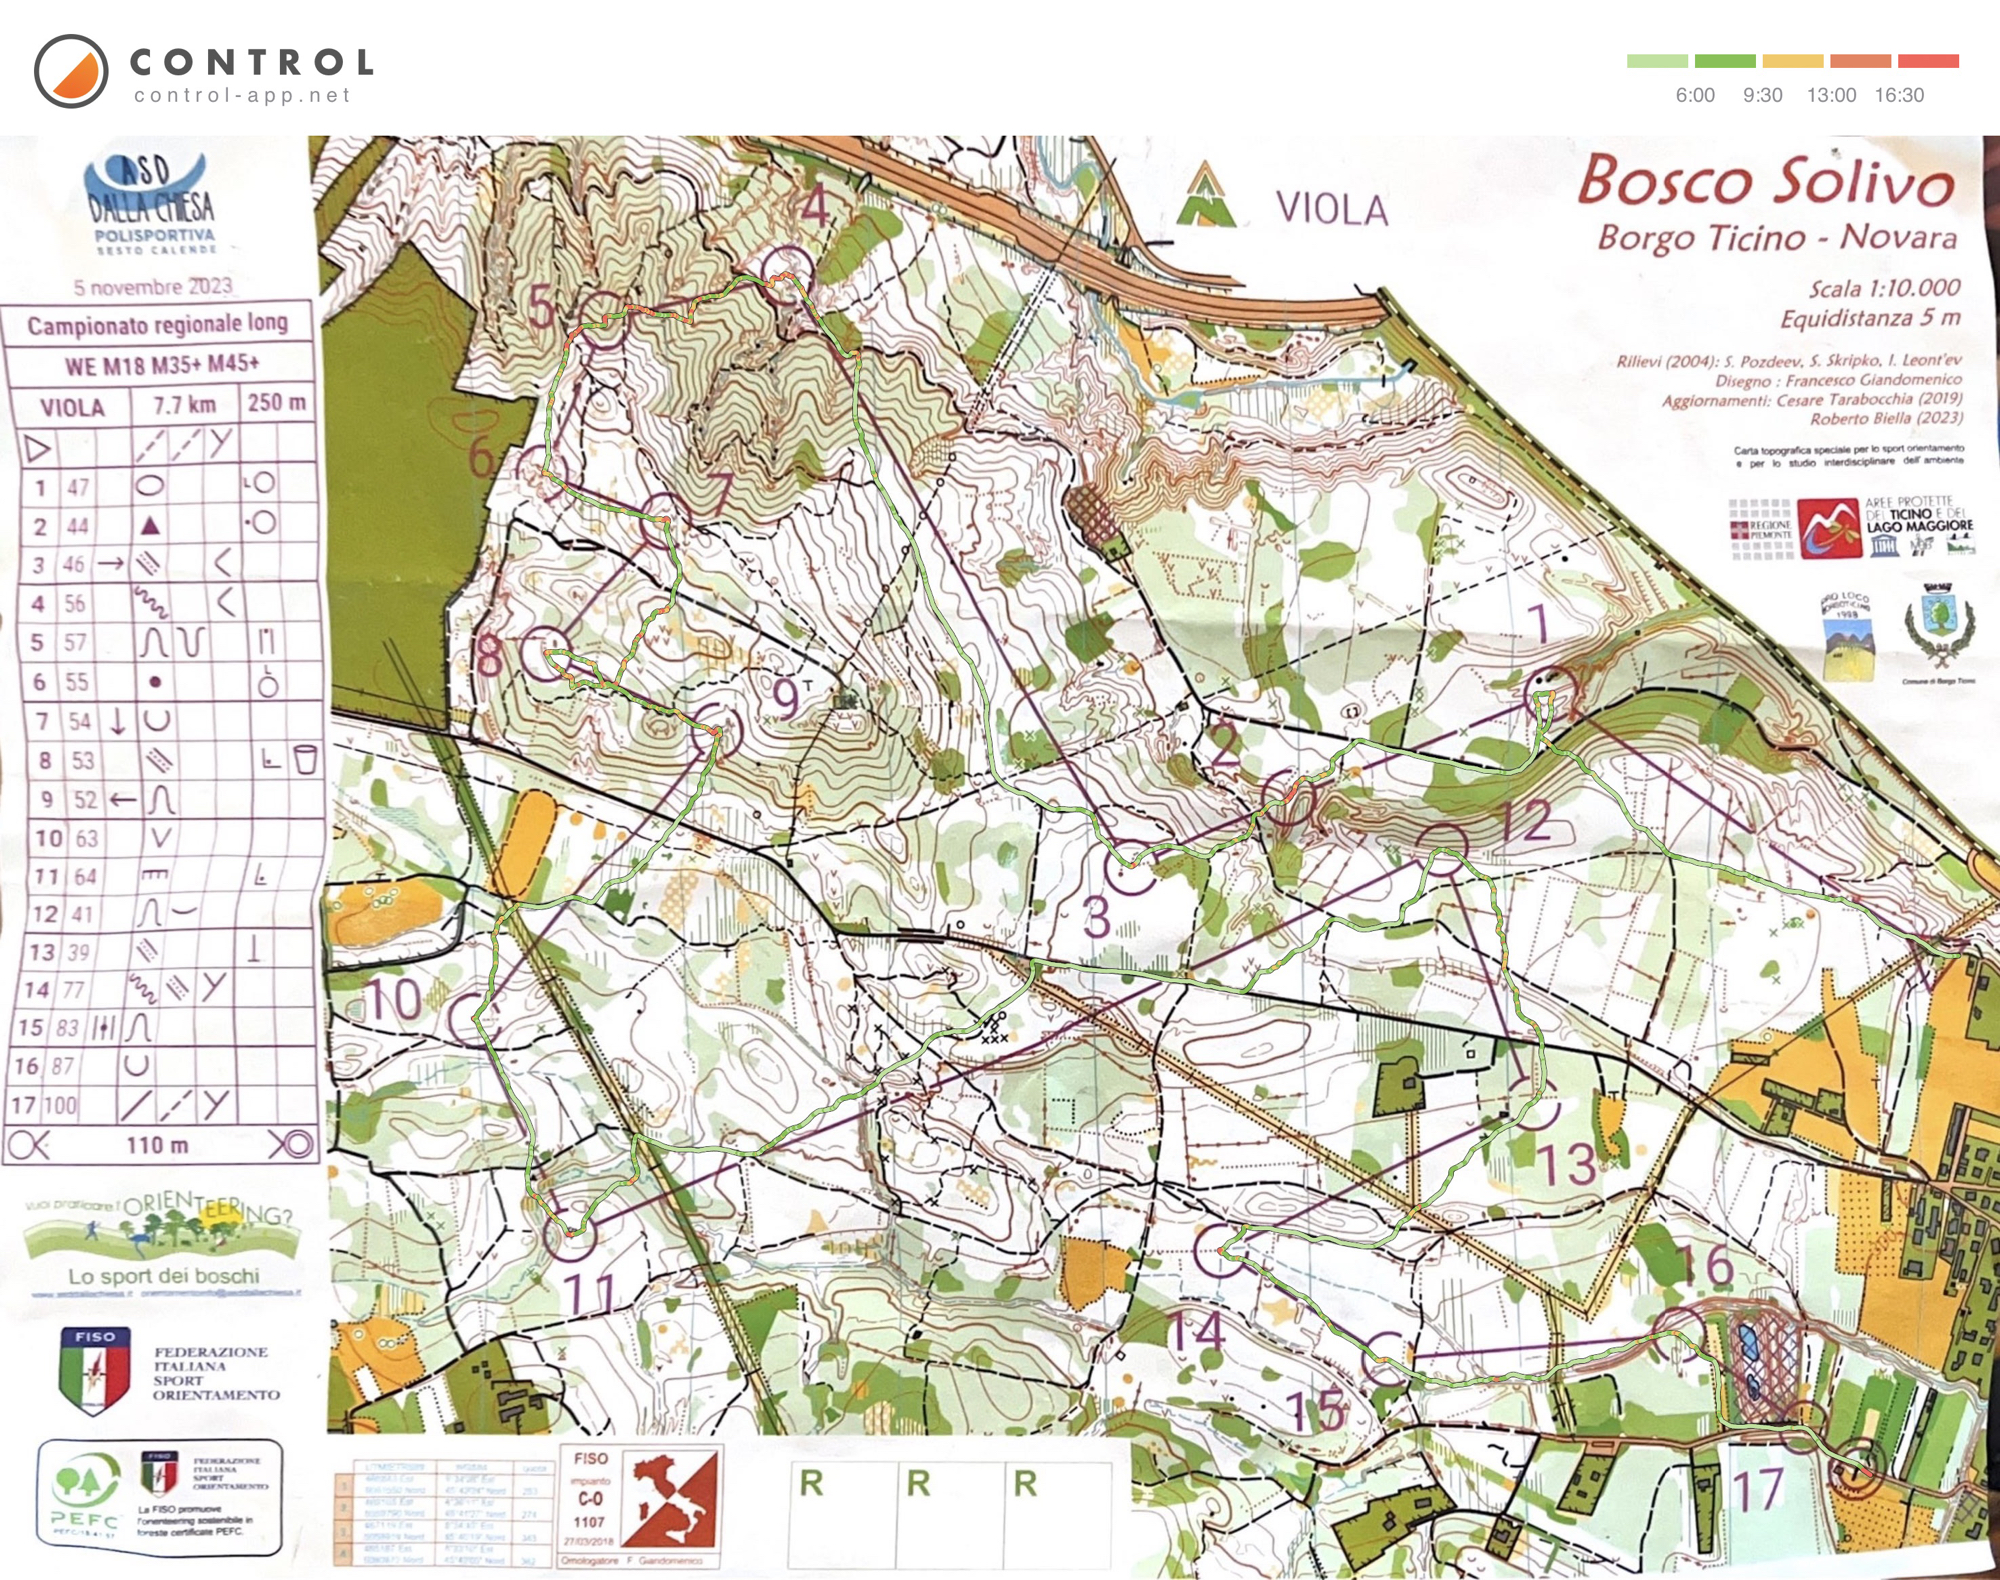 Map with track - Lombardia long championships, area - Borgo Ticino, from orienteering map archive of Veronika Kalinina